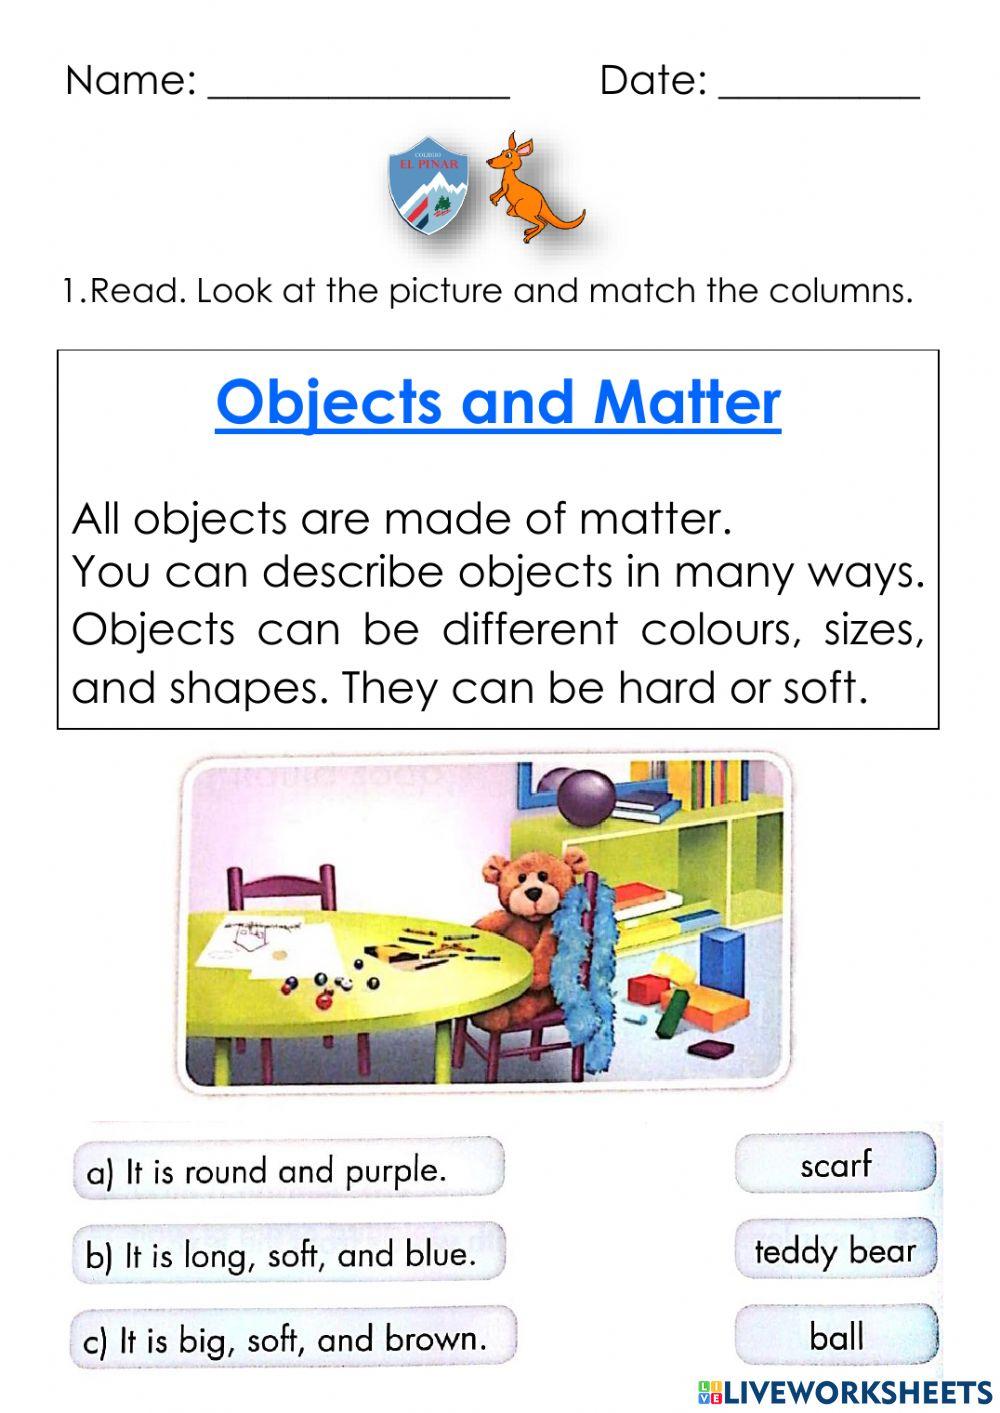 Objects and matter